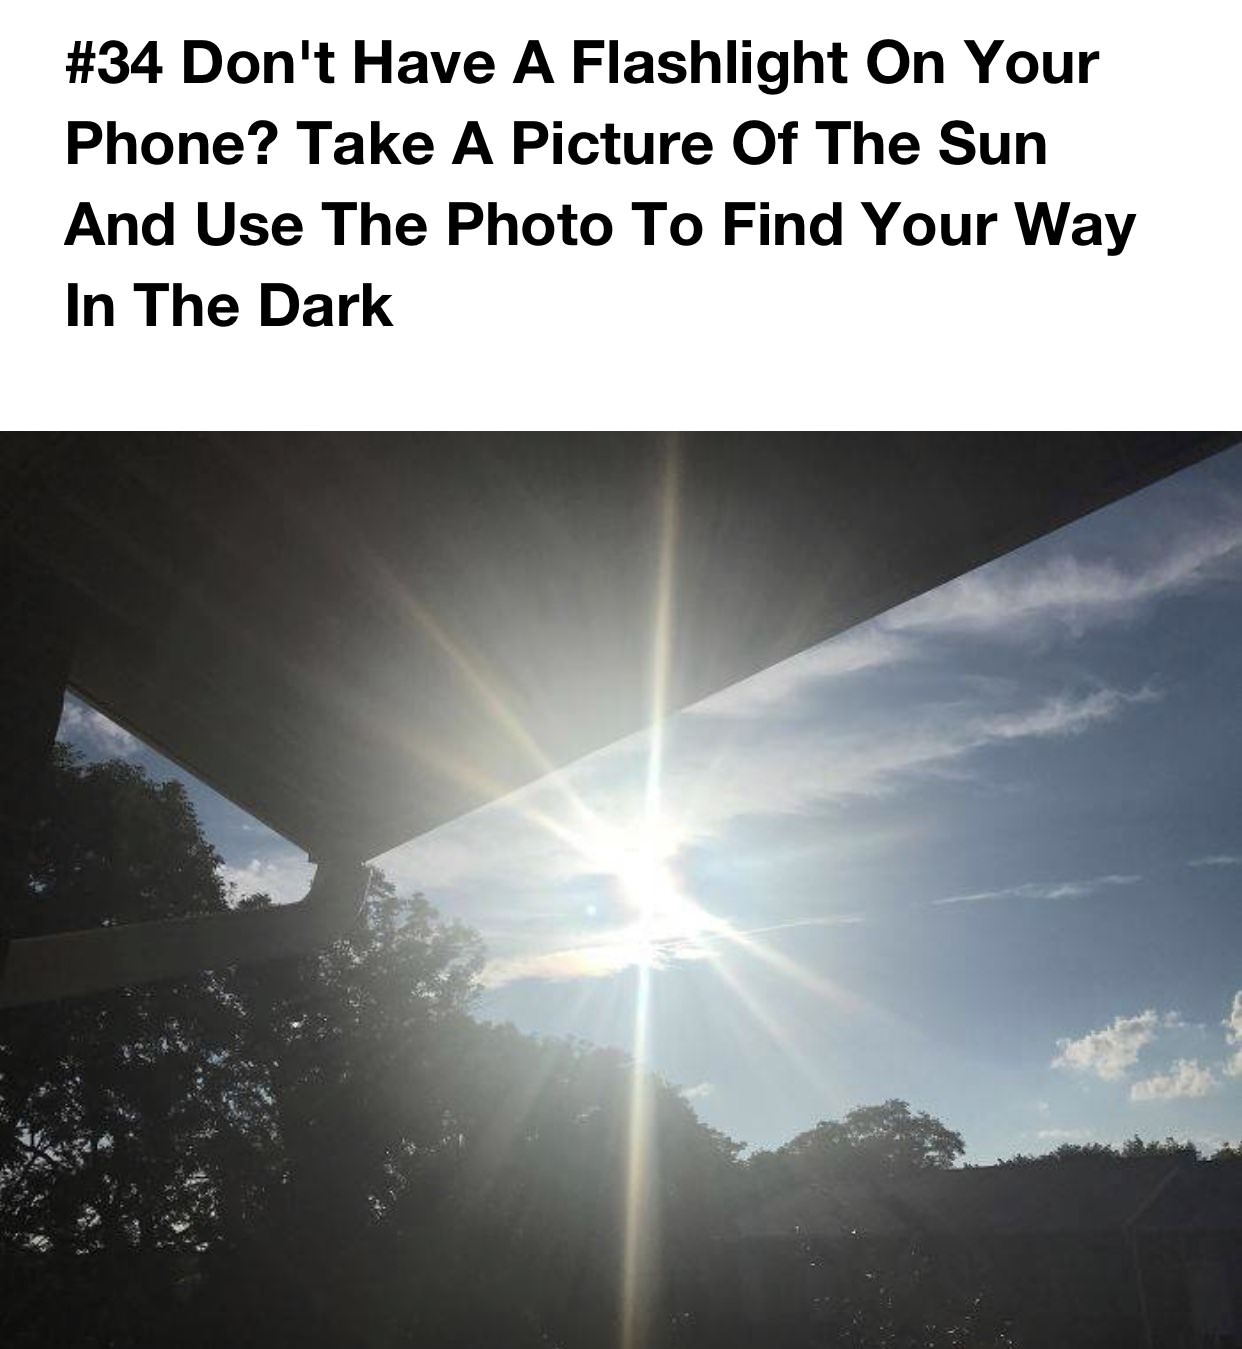 taking picture of the sun with phone - Don't Have A Flashlight On Your Phone? Take A Picture Of The Sun And Use The Photo To Find Your Way In The Dark